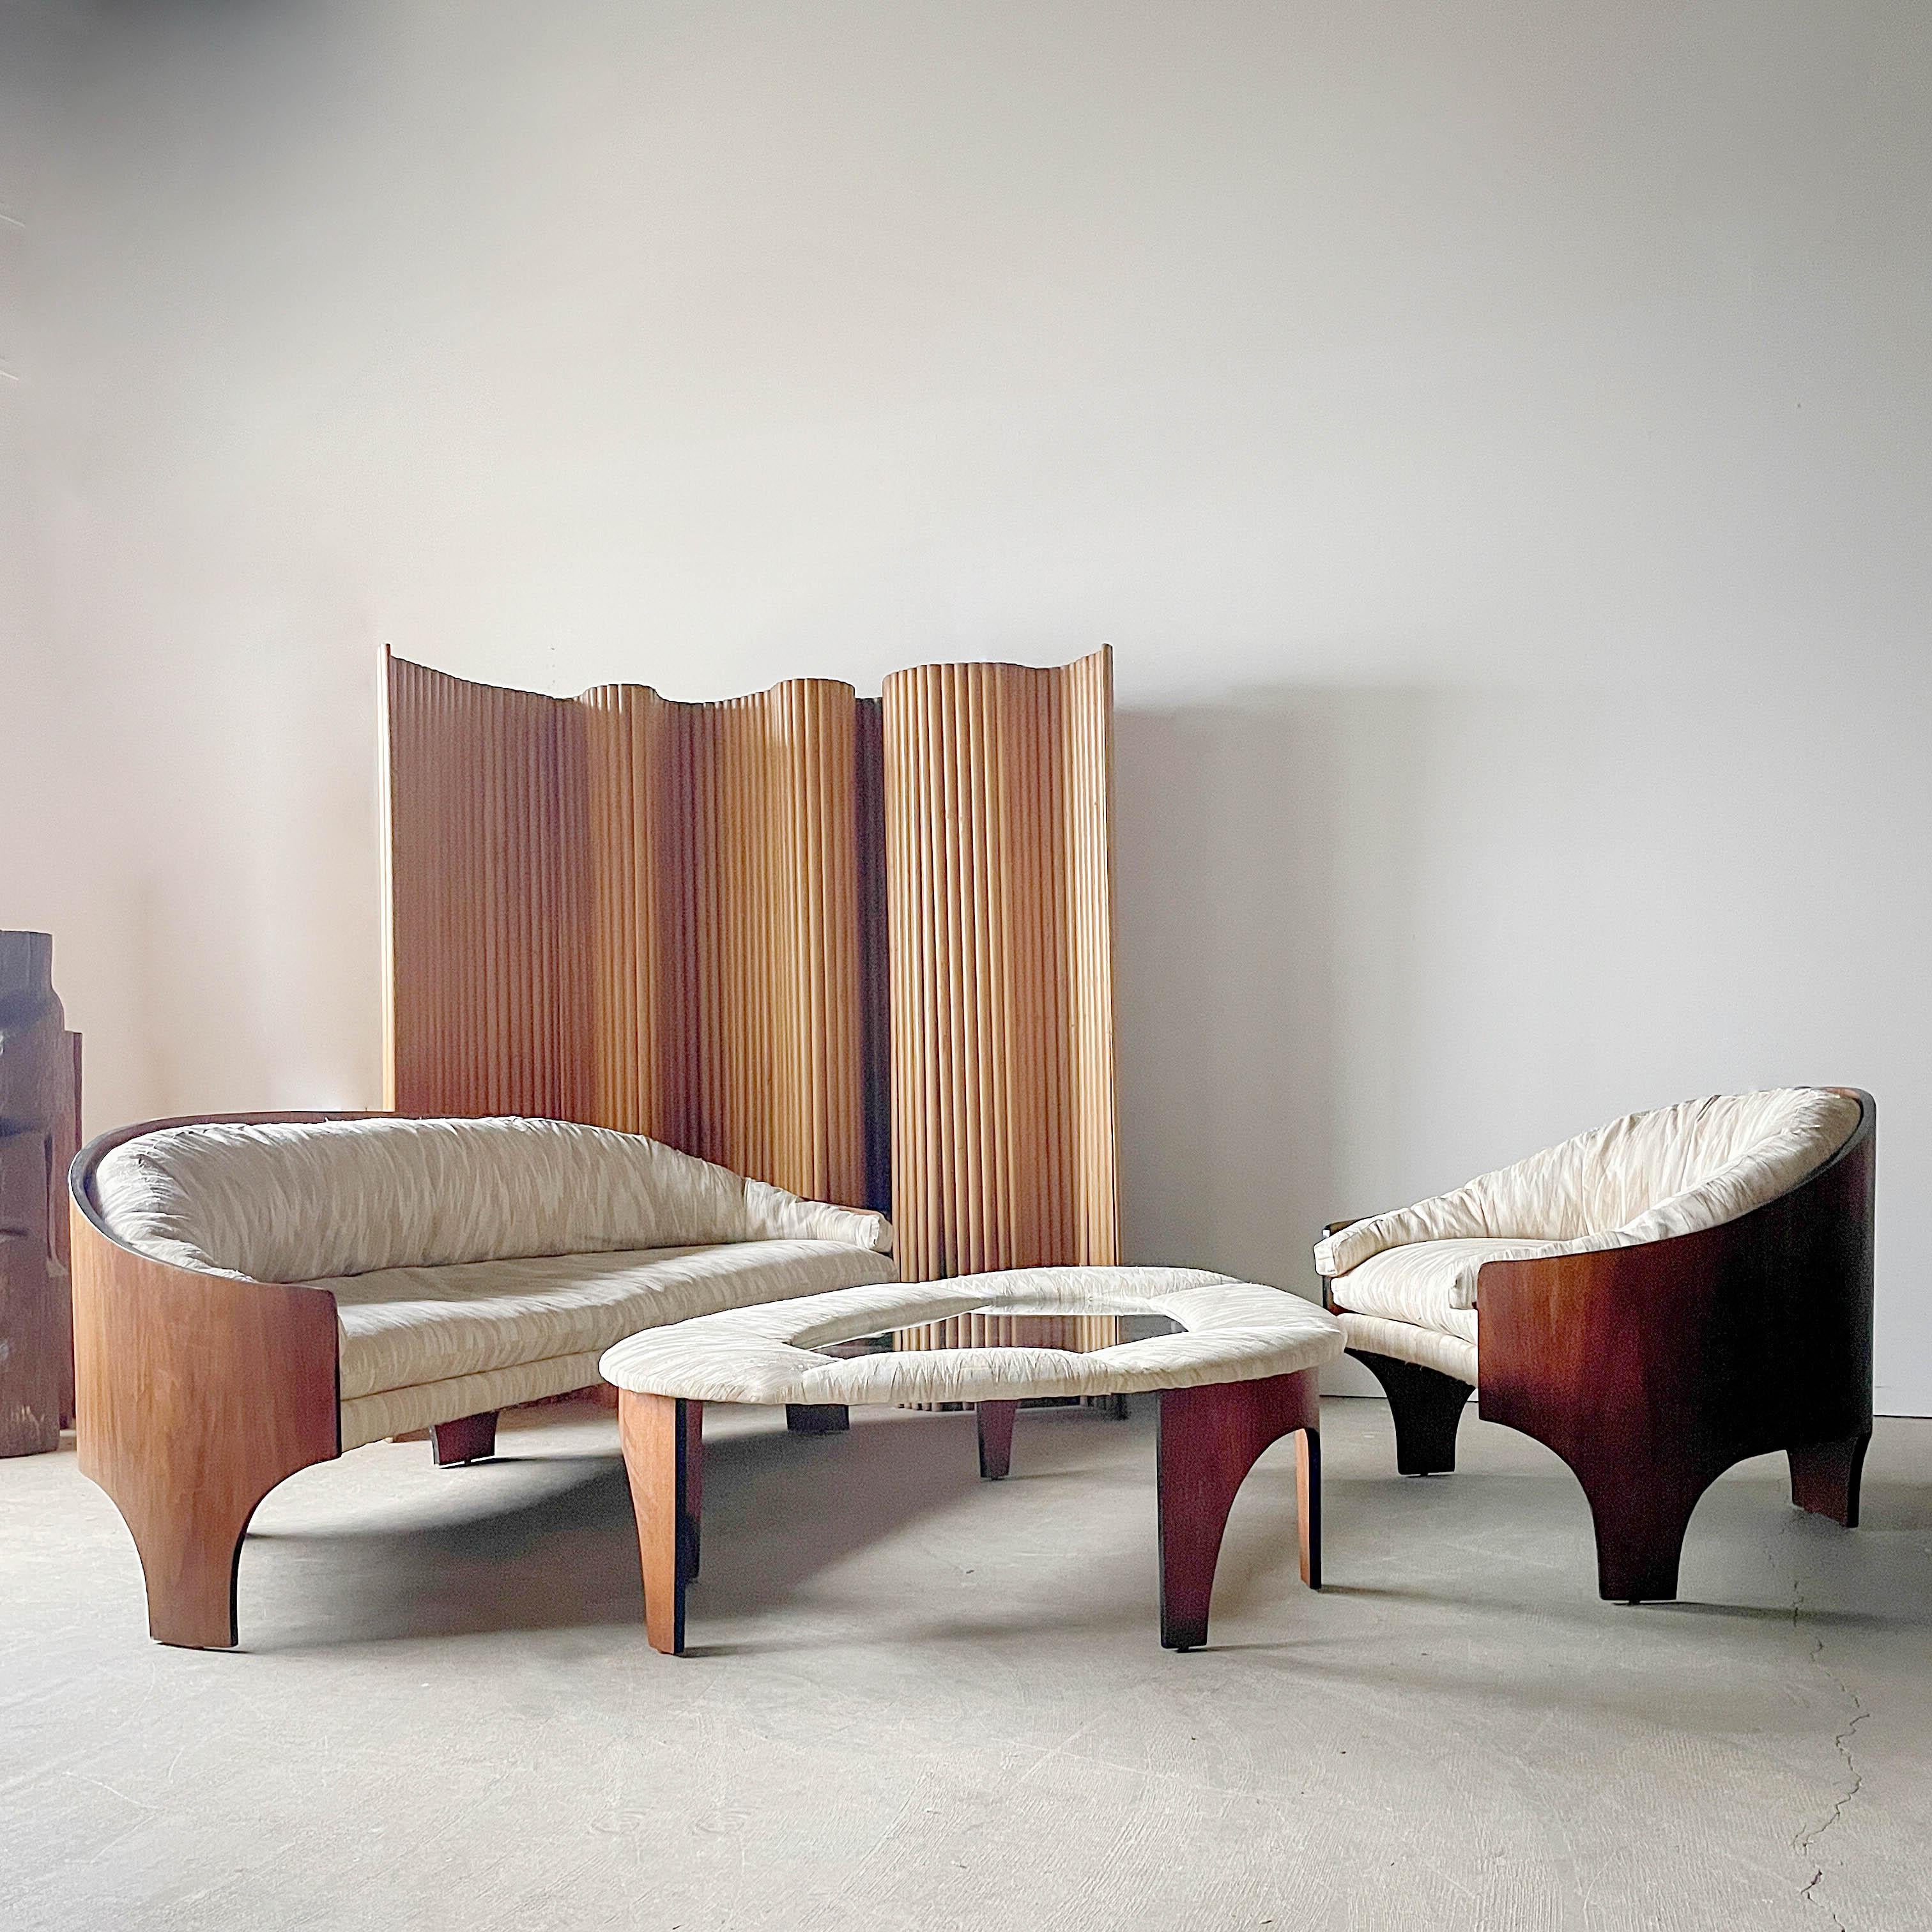 Rare molded plywood suite designed by legendary Henry P. Glass and made by Deco House in the 1960s. Featuring a unique leg profile and curved walnut plywood backs, this set of Glass designed furniture is incredibly modern and eye catching. Glass